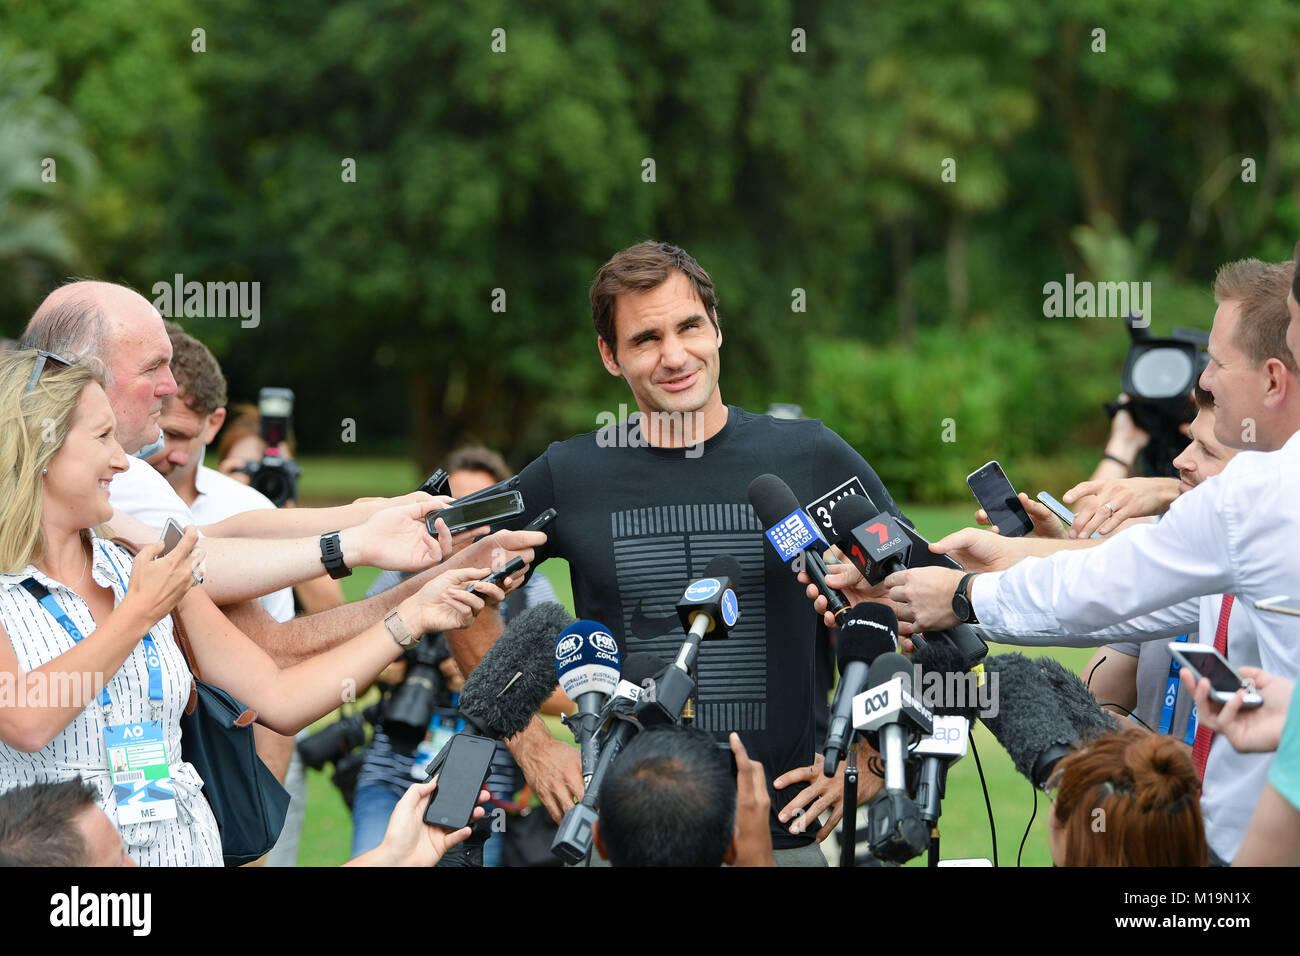 Melbourne, Australia. 29th Jan, 2018. The 2018 Australian Open champion Roger Federer of Switzerland speaks to the media after posing for photographs with his trophy at Government House in Melbourne, Australia. Federer beat Cilic 3 sets to 2. Sydney Low/Cal Sport Media/Alamy Live News Stock Photo